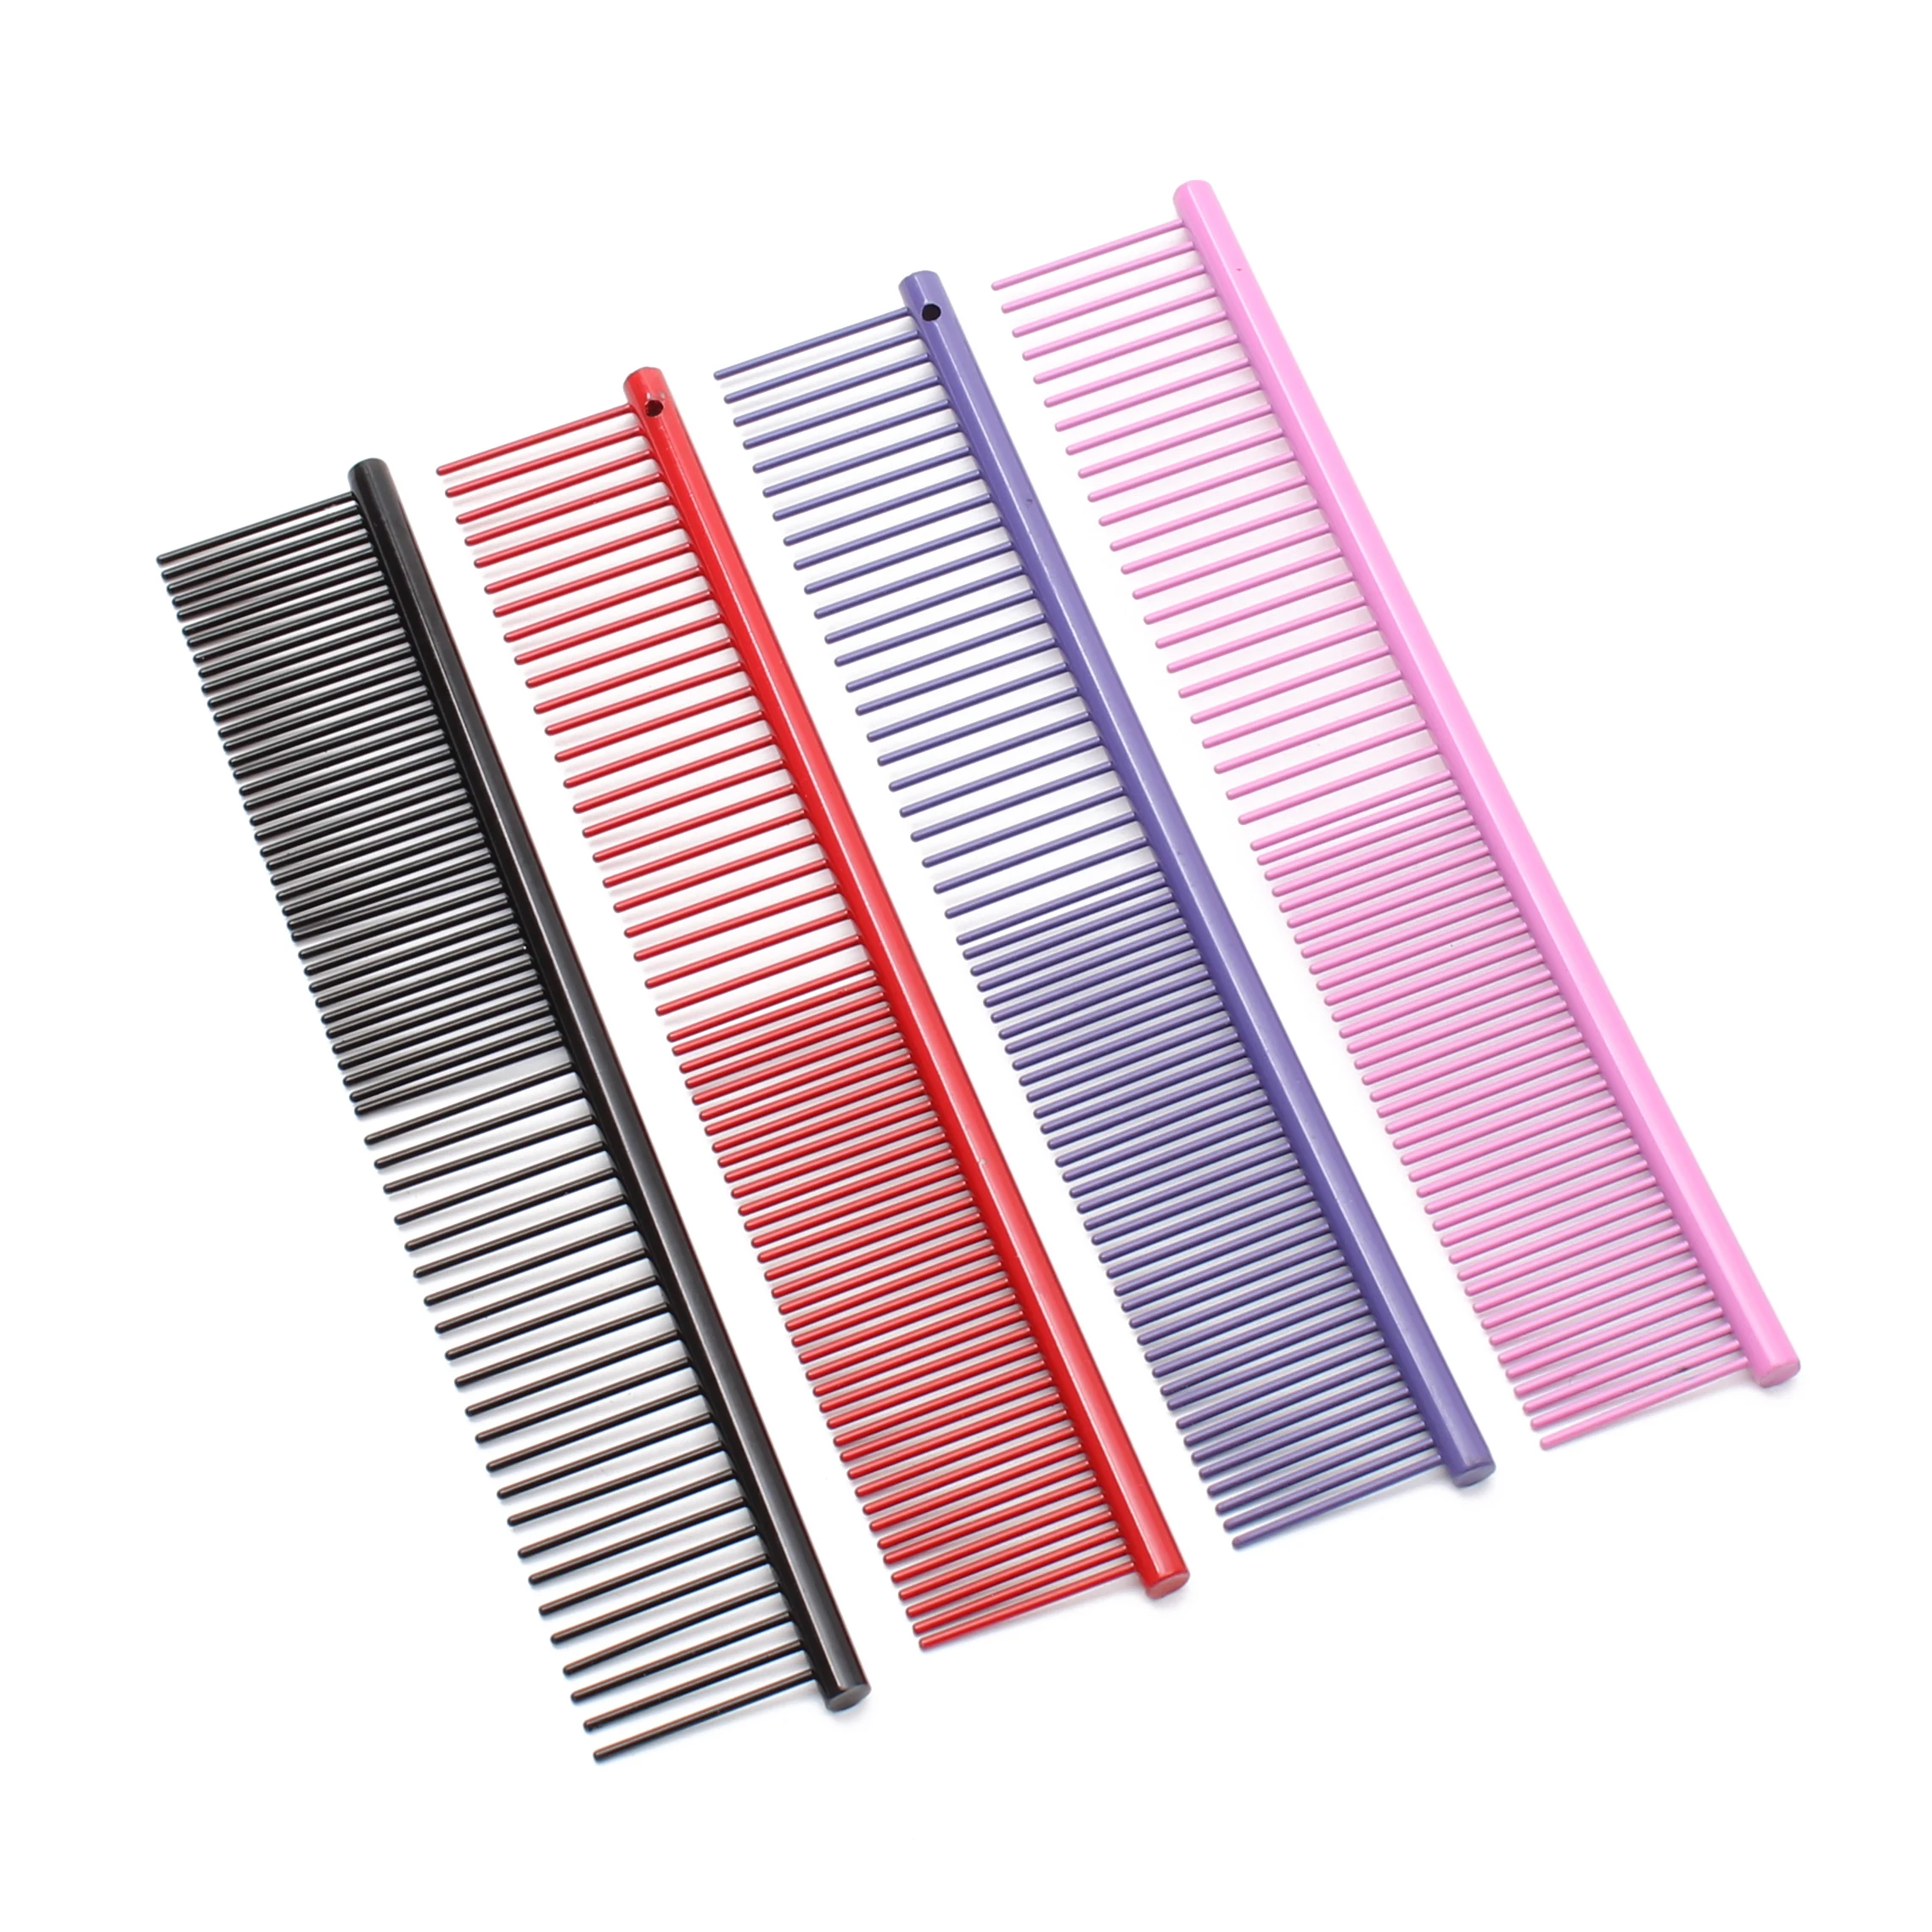 

Colorful Paint Stainless Steel Pet Grooming Comb Row Teeth Needle Hair Trimmer Cat Dog Grooming Comb C6705, Customized color